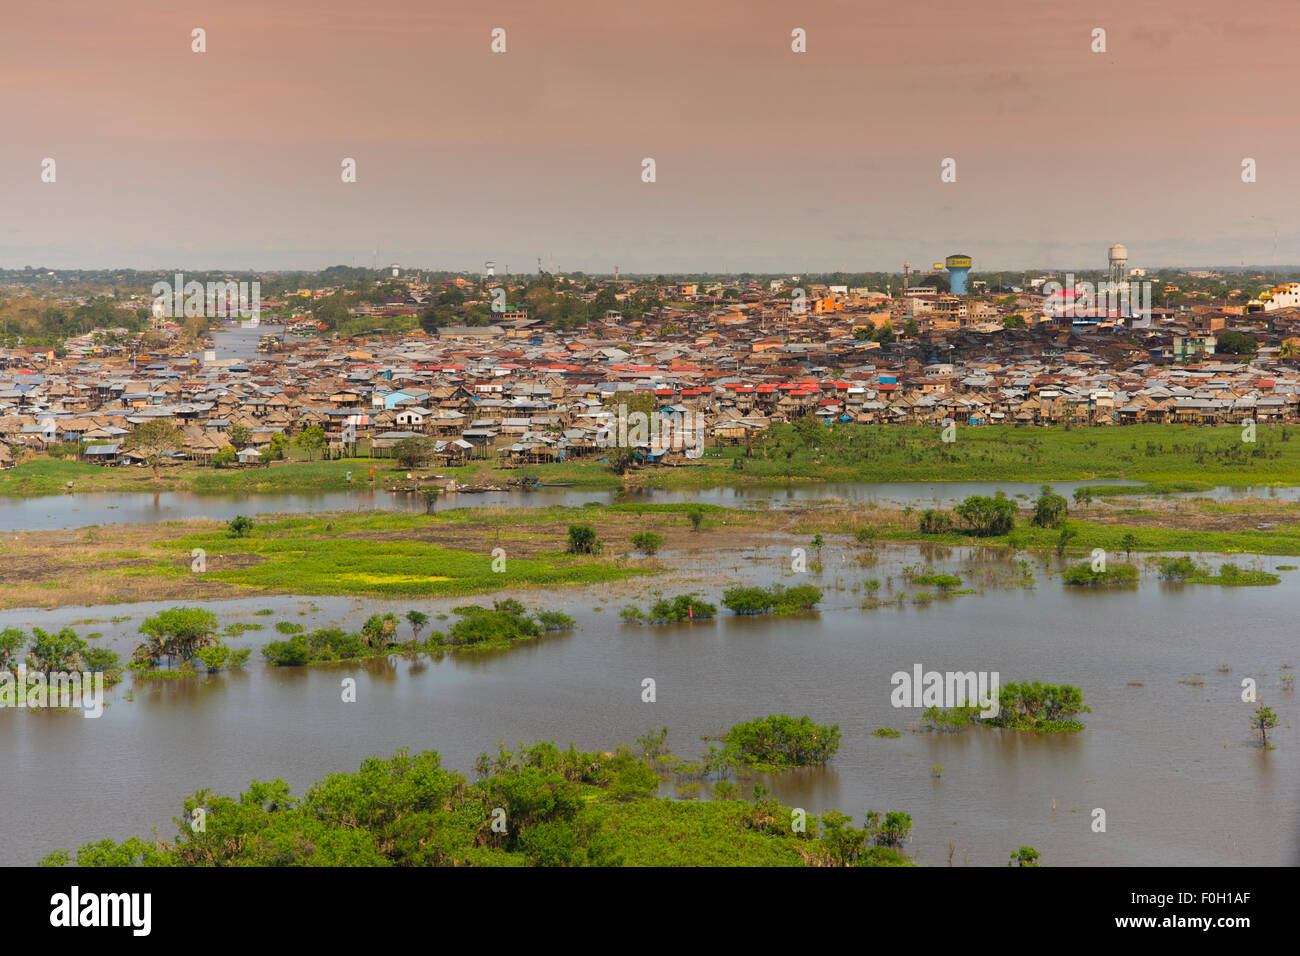 Iquitos from the air on the River Amazon, district of Belen showing floodplain of Itaya and Amazon Rivers, Peru Stock Photo